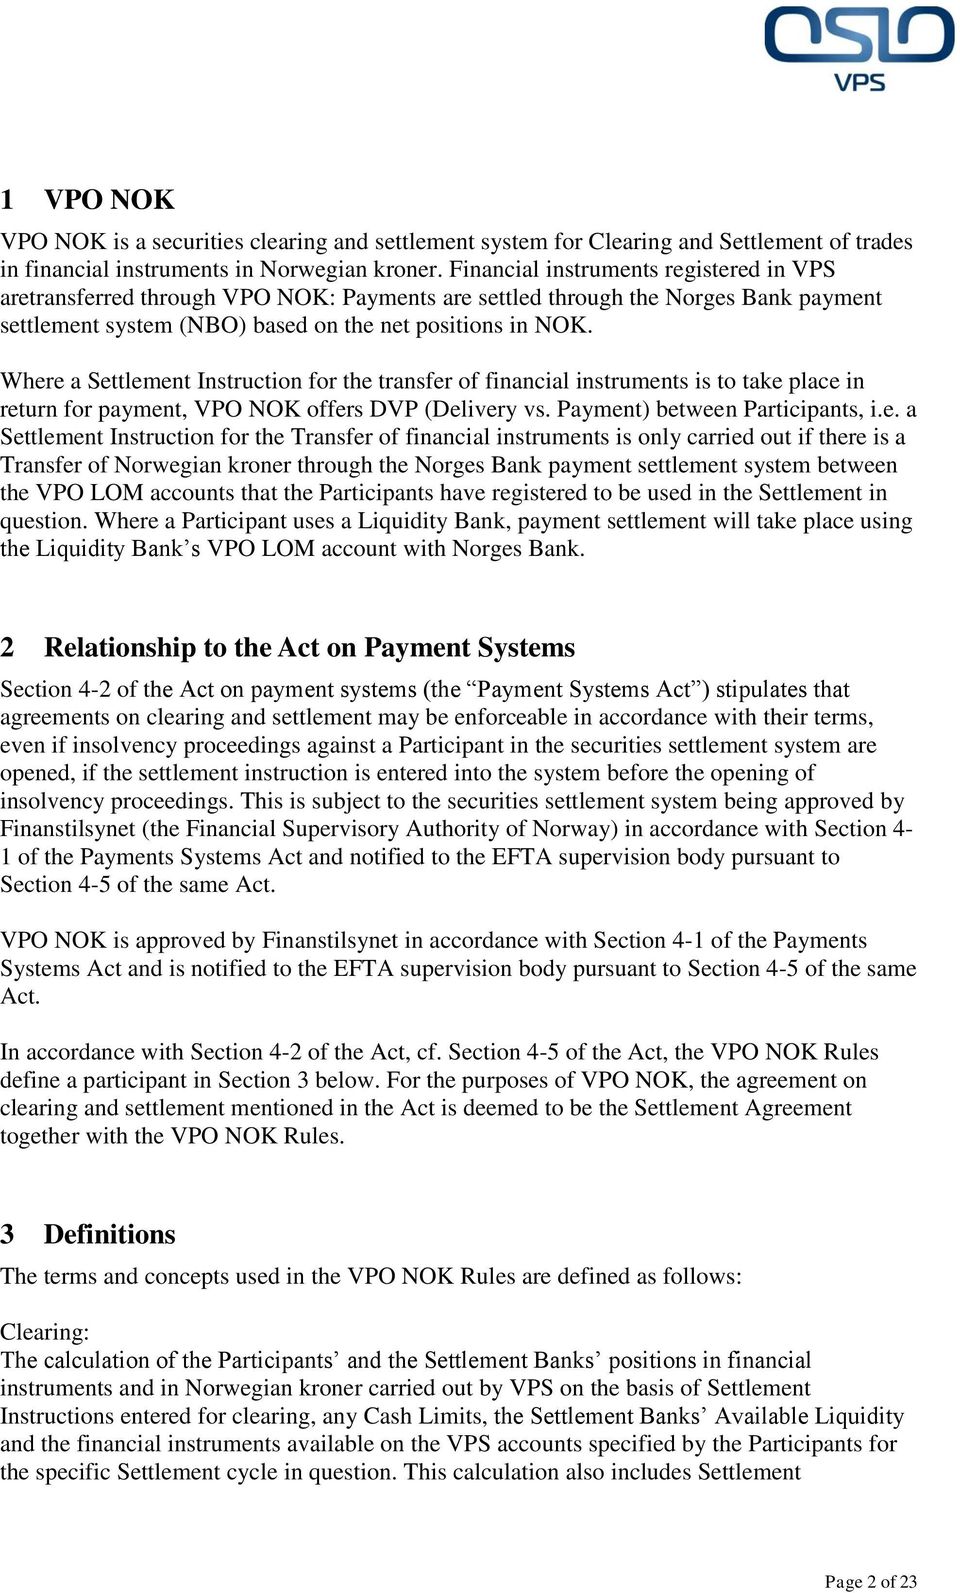 Where a Settlement Instruction for the transfer of financial instruments is to take place in return for payment, VPO NOK offers DVP (Delivery vs. Payment) between Participants, i.e. a Settlement